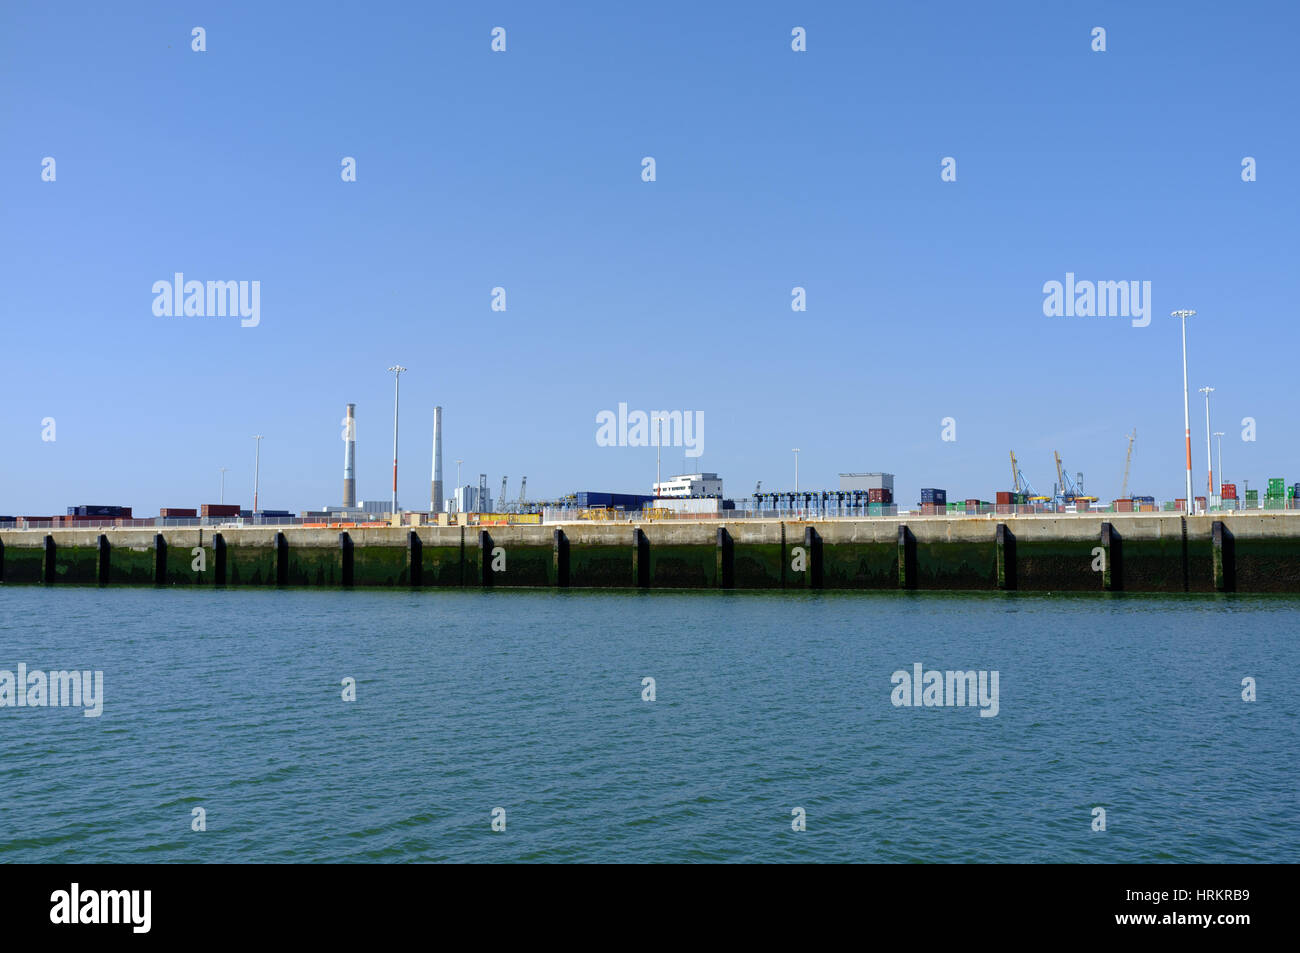 Dockyard view from the sea at the Port of Le Havre, Le Havre, France Stock Photo